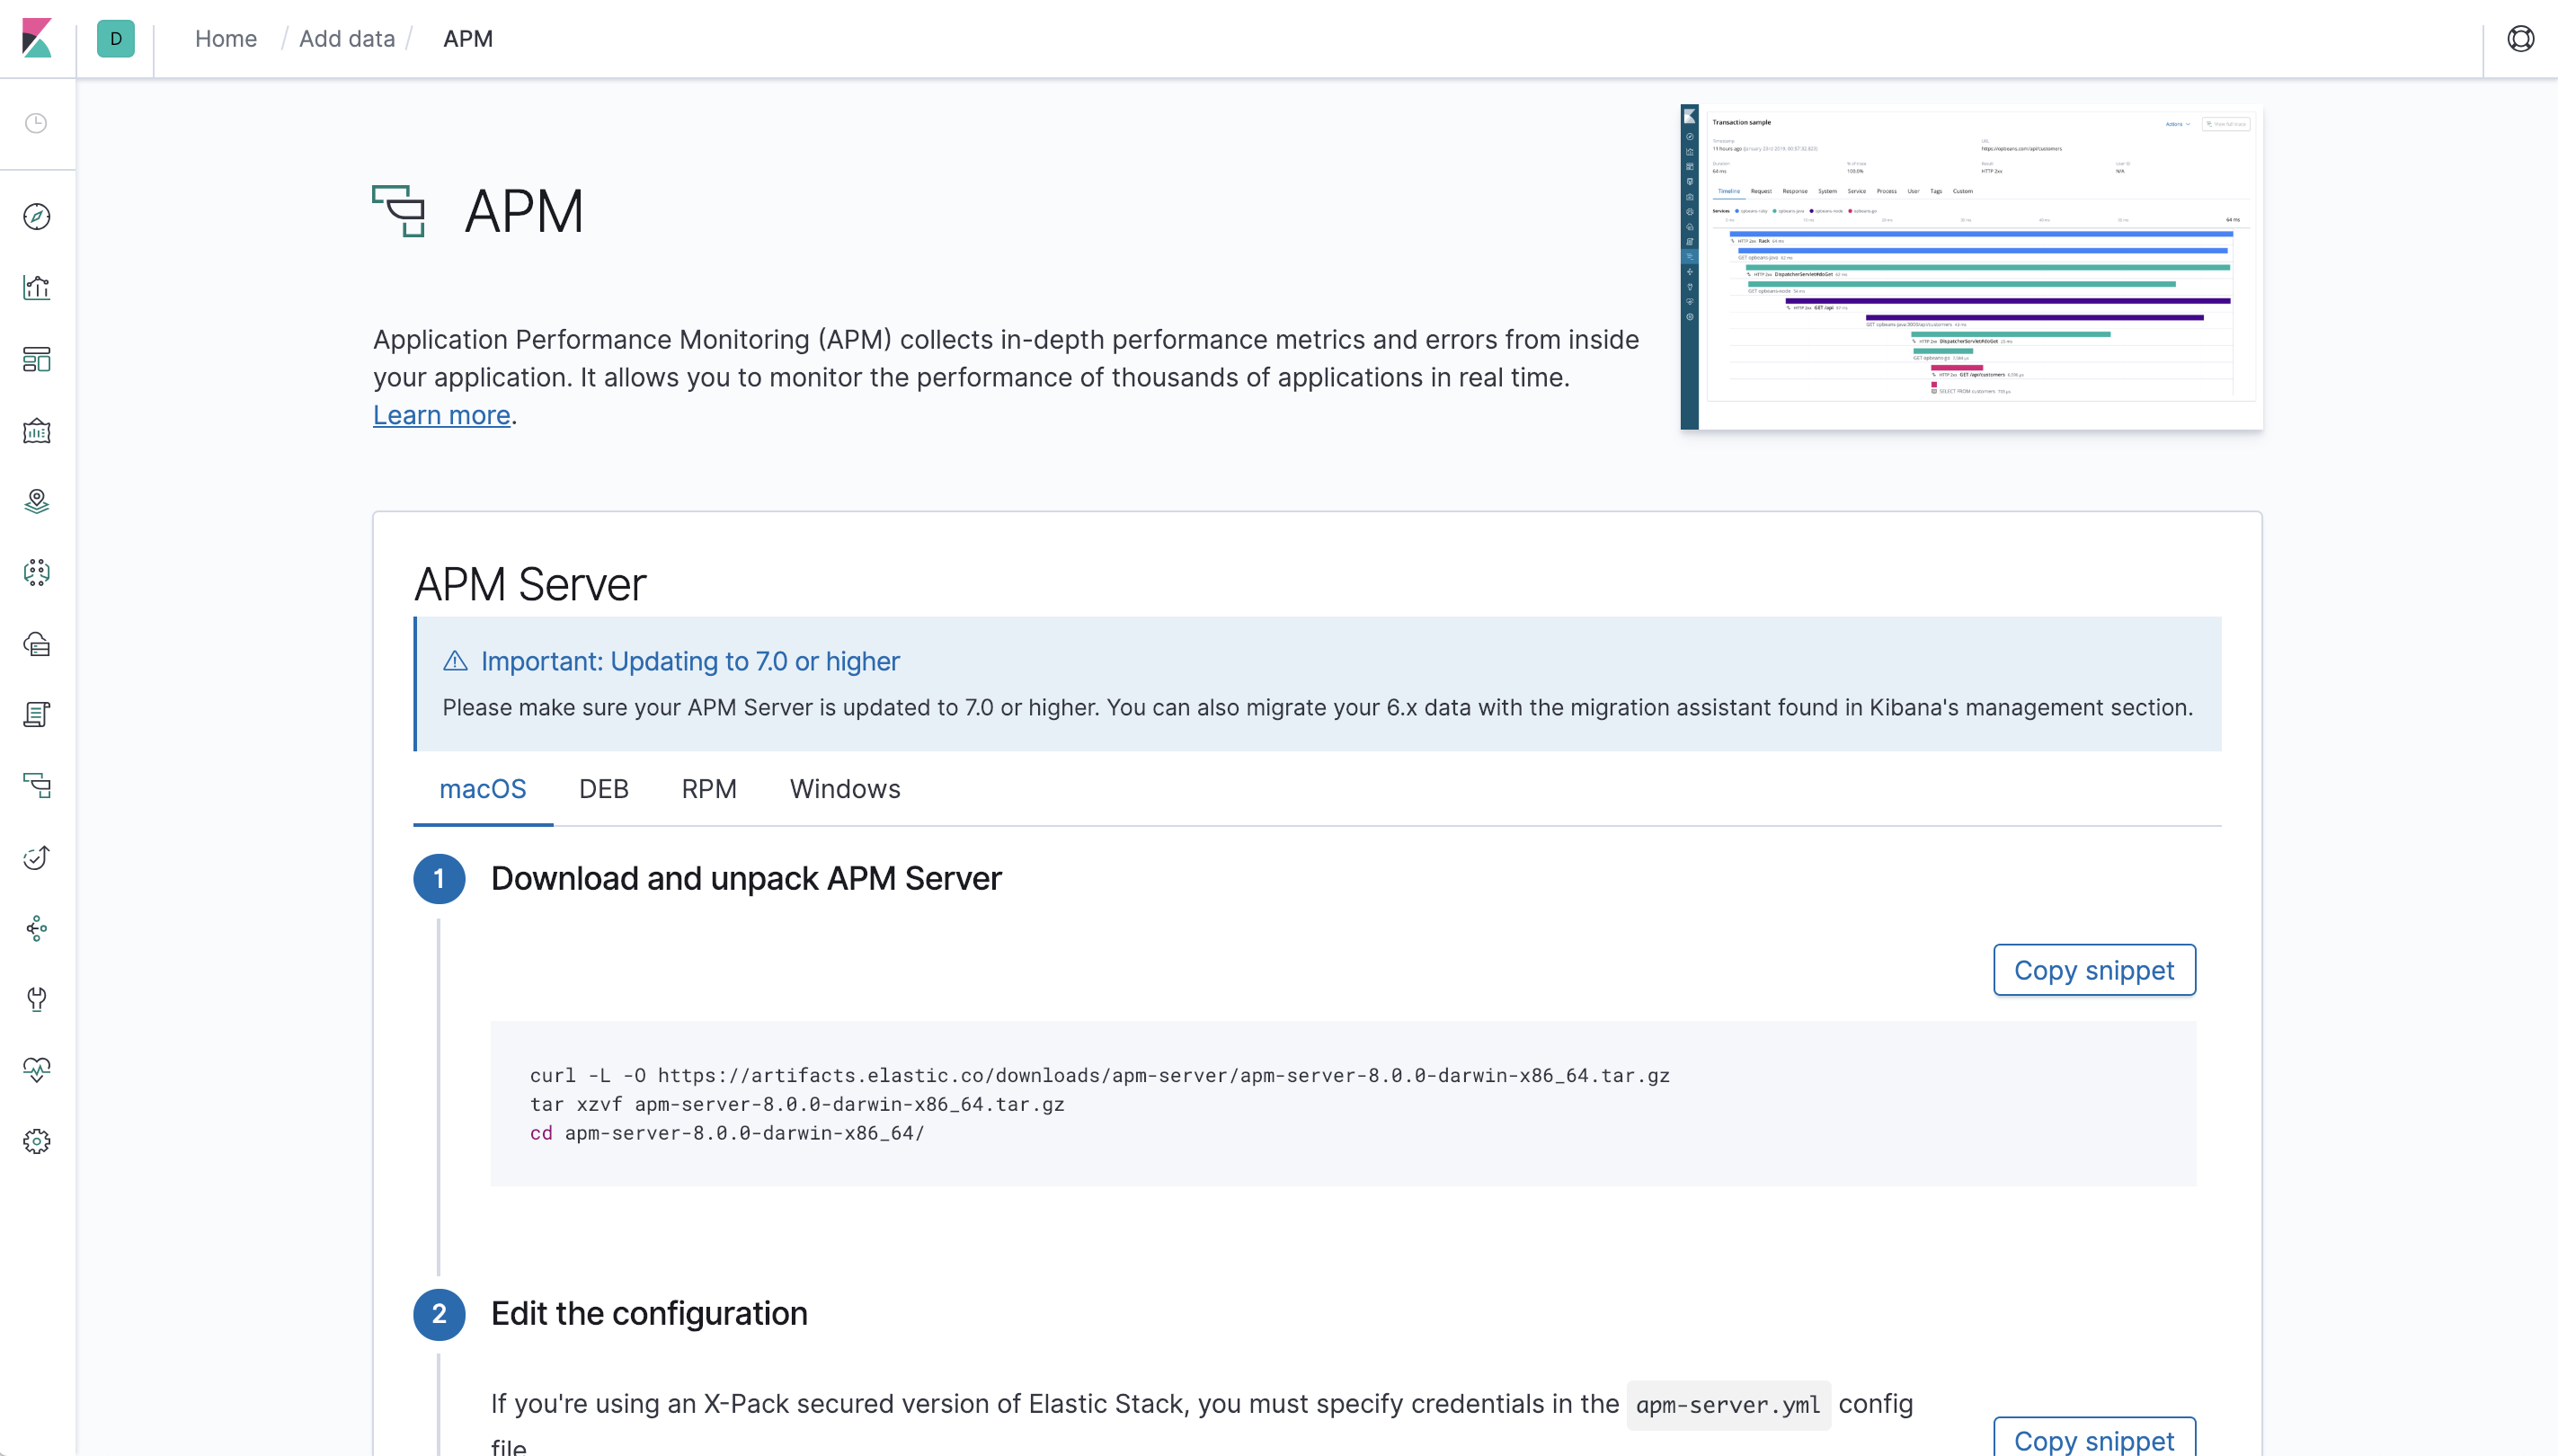 Installation instructions on the APM page in Kibana